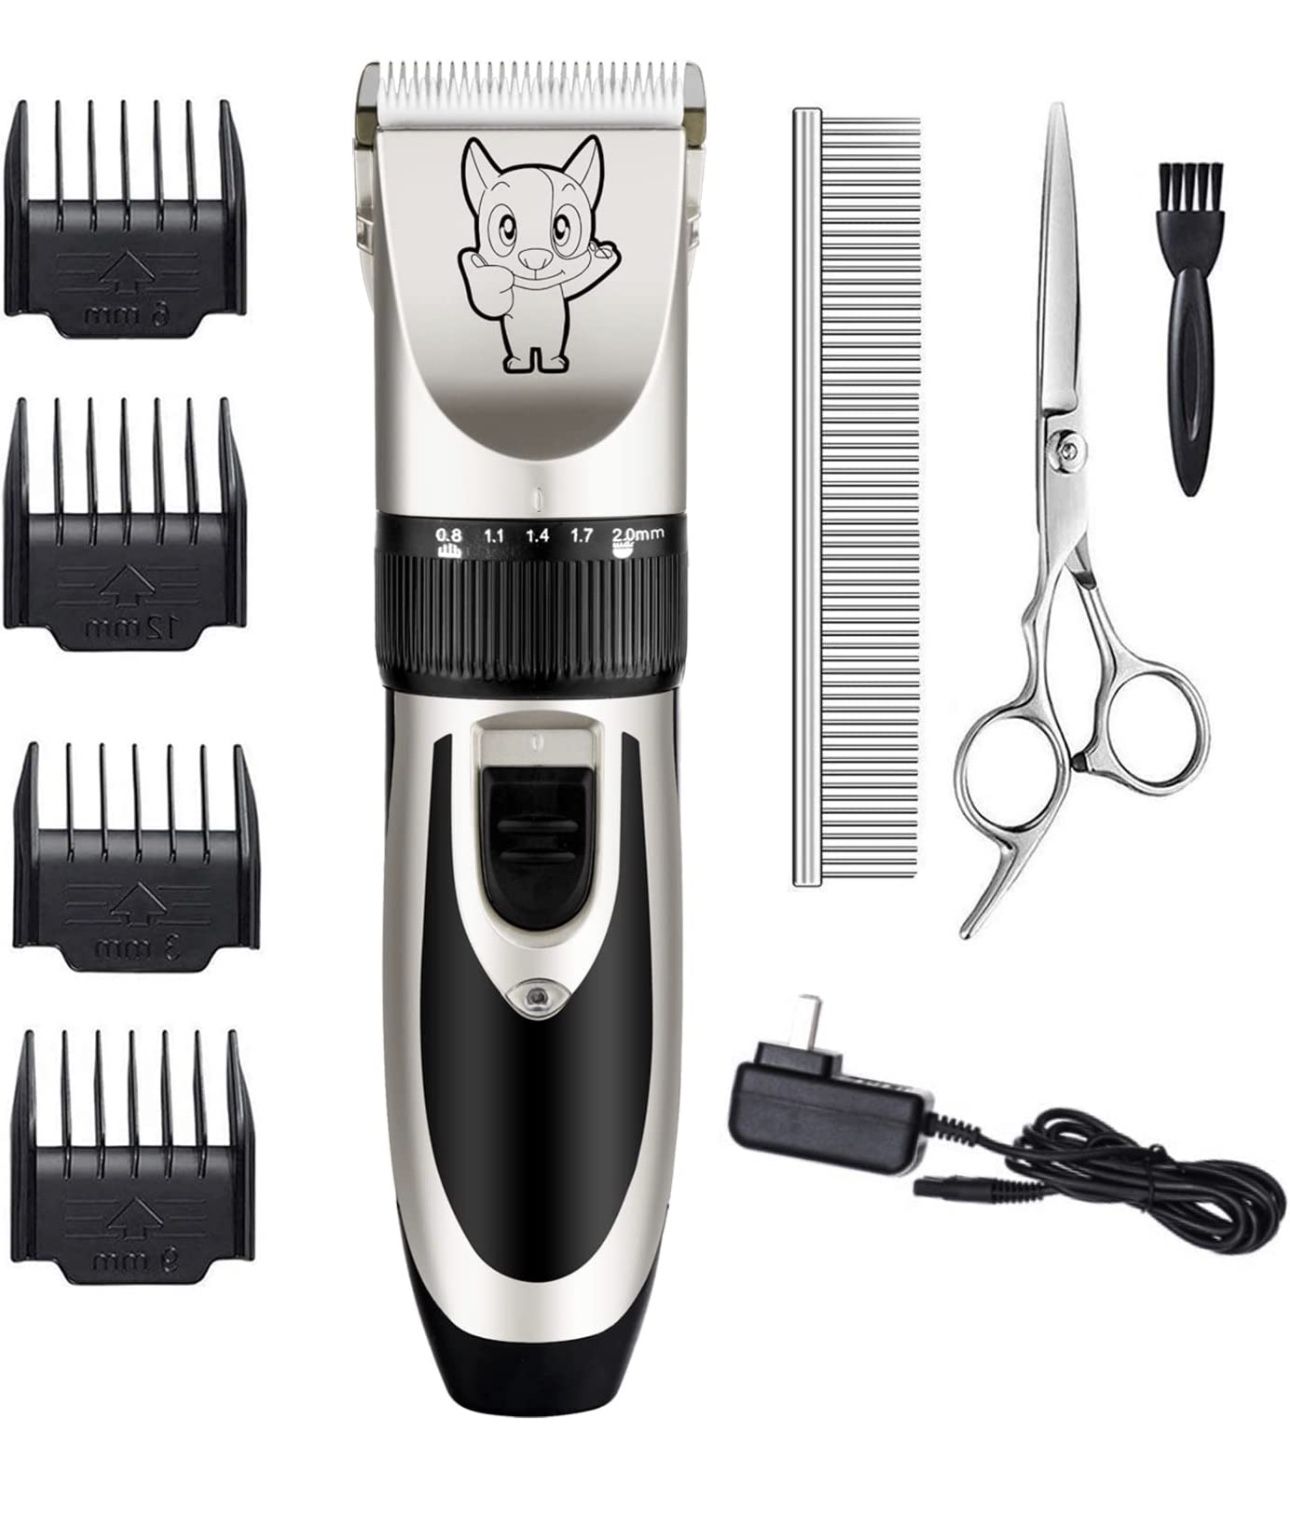 Dog Grooming Kit Clippers, Low Noise, Electric Quiet, Rechargeable, Cordless, Pet Hair Thick Coats Clippers Trimmers Set, Suitable for Dogs, Cats, and